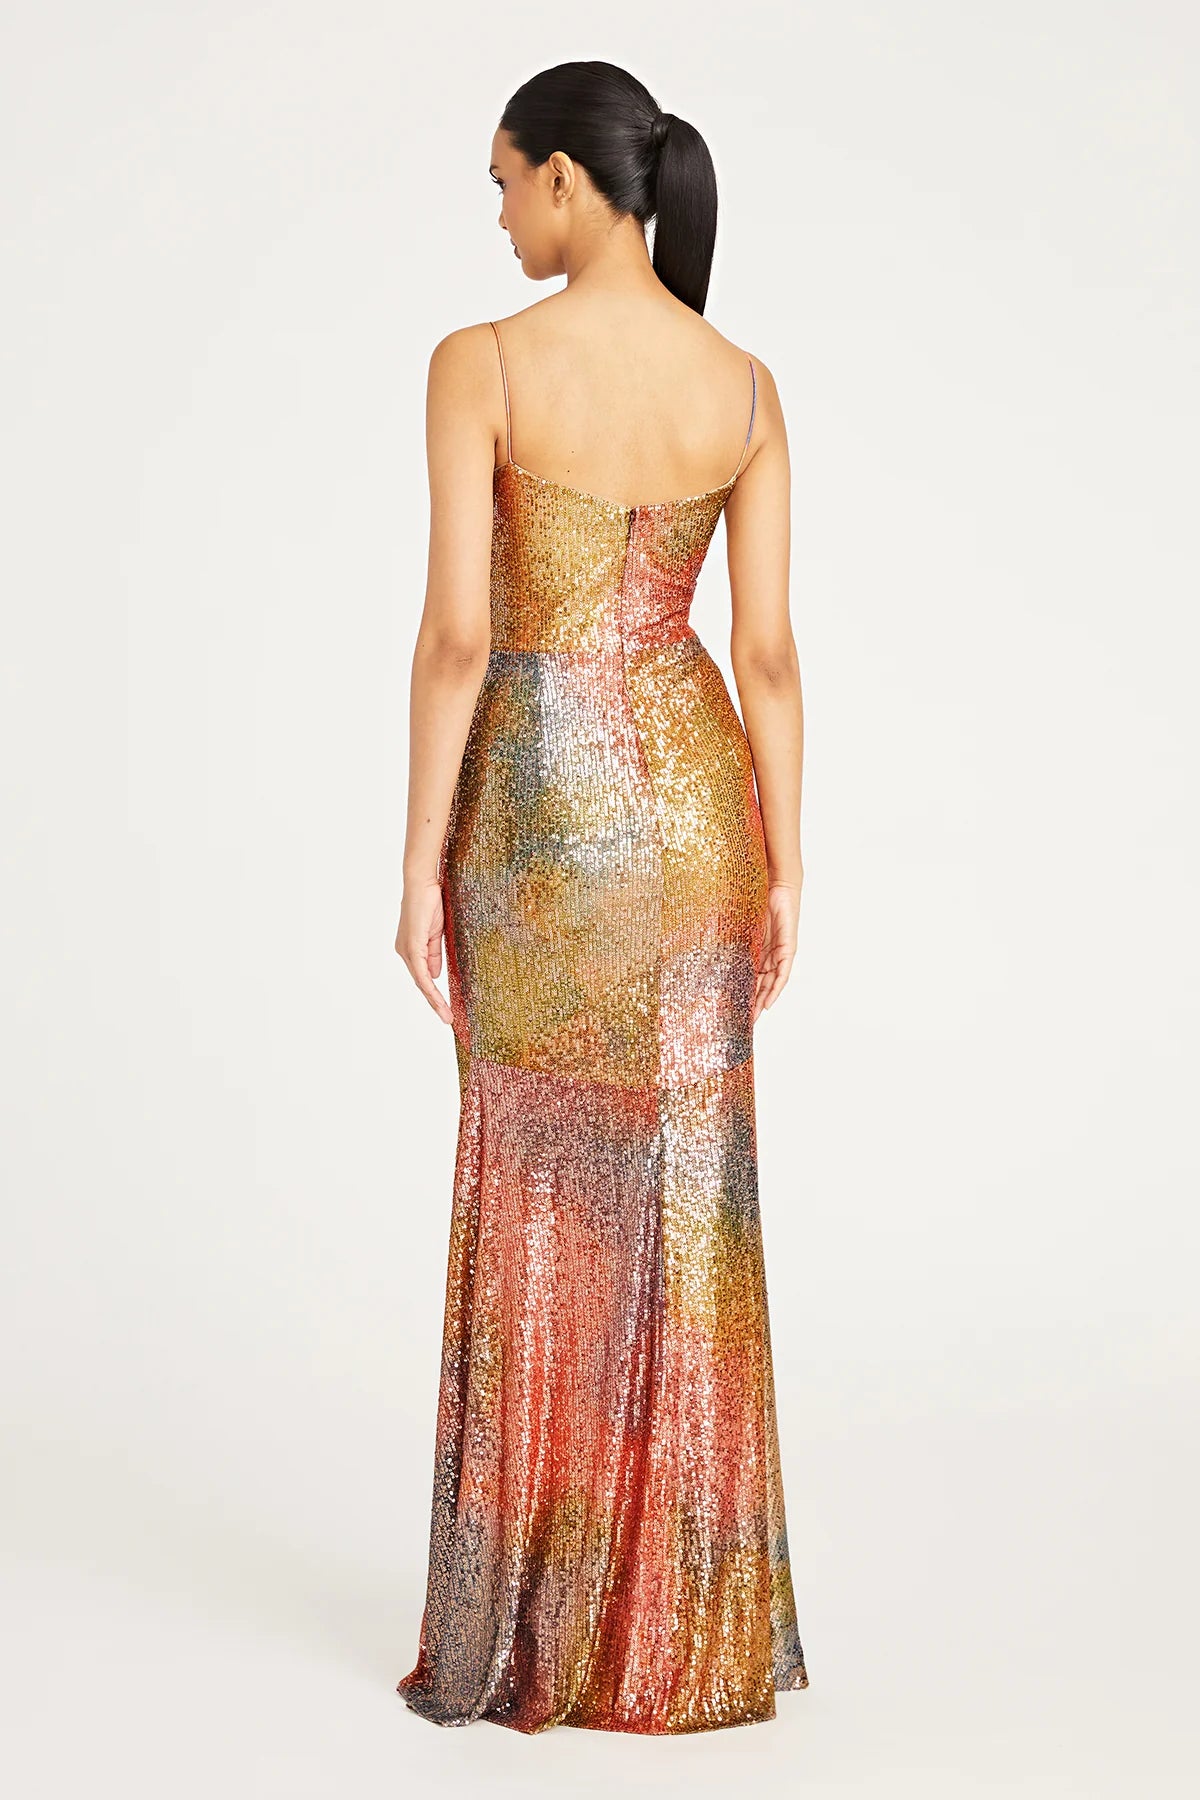 Stunning Brynn Cowl Neck Sequin Gown in Daydream color by Theia, available at Madeline's. Perfect for special occasions, this floor-length dress features spaghetti straps, a cowl neck, and a fitted silhouette. Made with printed sequins and offering a slight stretch, it exudes elegance and charm. Shop now at Madeline's in Toronto and Boca Raton.